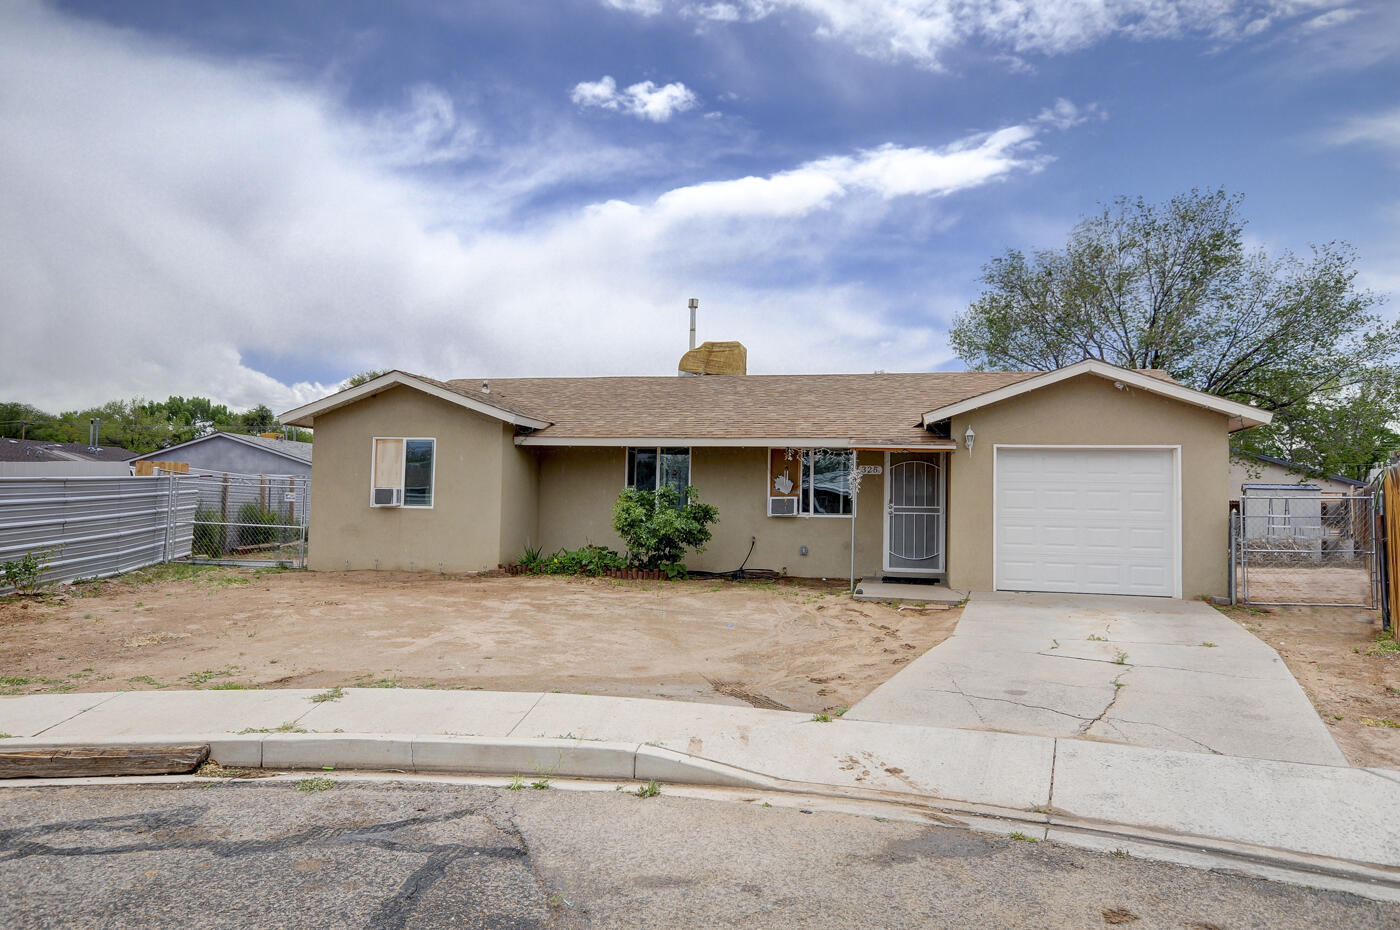 325 Calle Don Marcos NE, Los Lunas, New Mexico 87031, 3 Bedrooms Bedrooms, ,1 BathroomBathrooms,Residential,For Sale,325 Calle Don Marcos NE,1062069